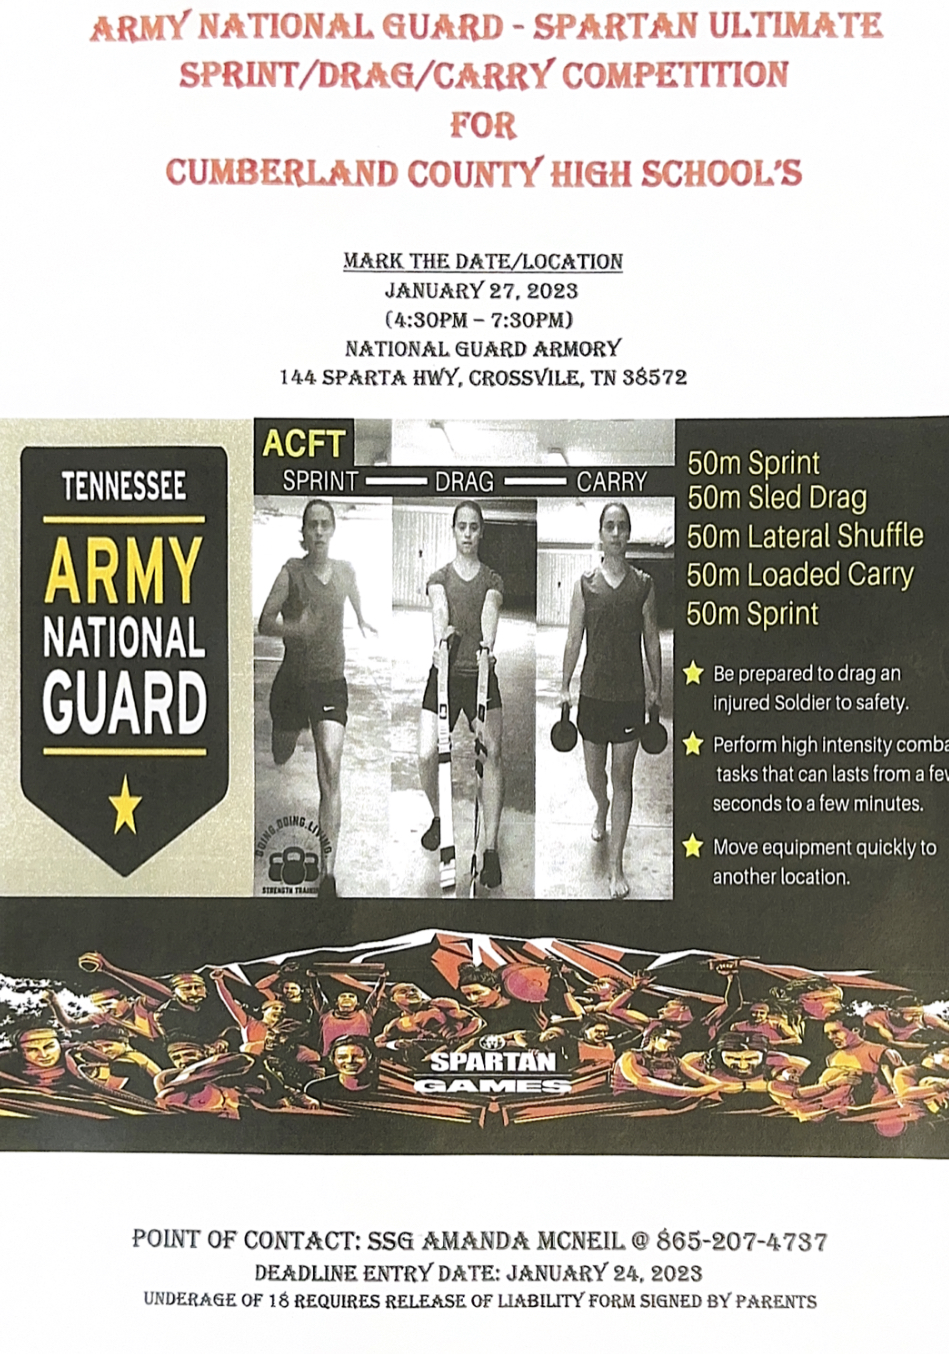 The army national guard is having a spartan competition at the armory on January 27th from 4:30-7:30pm.